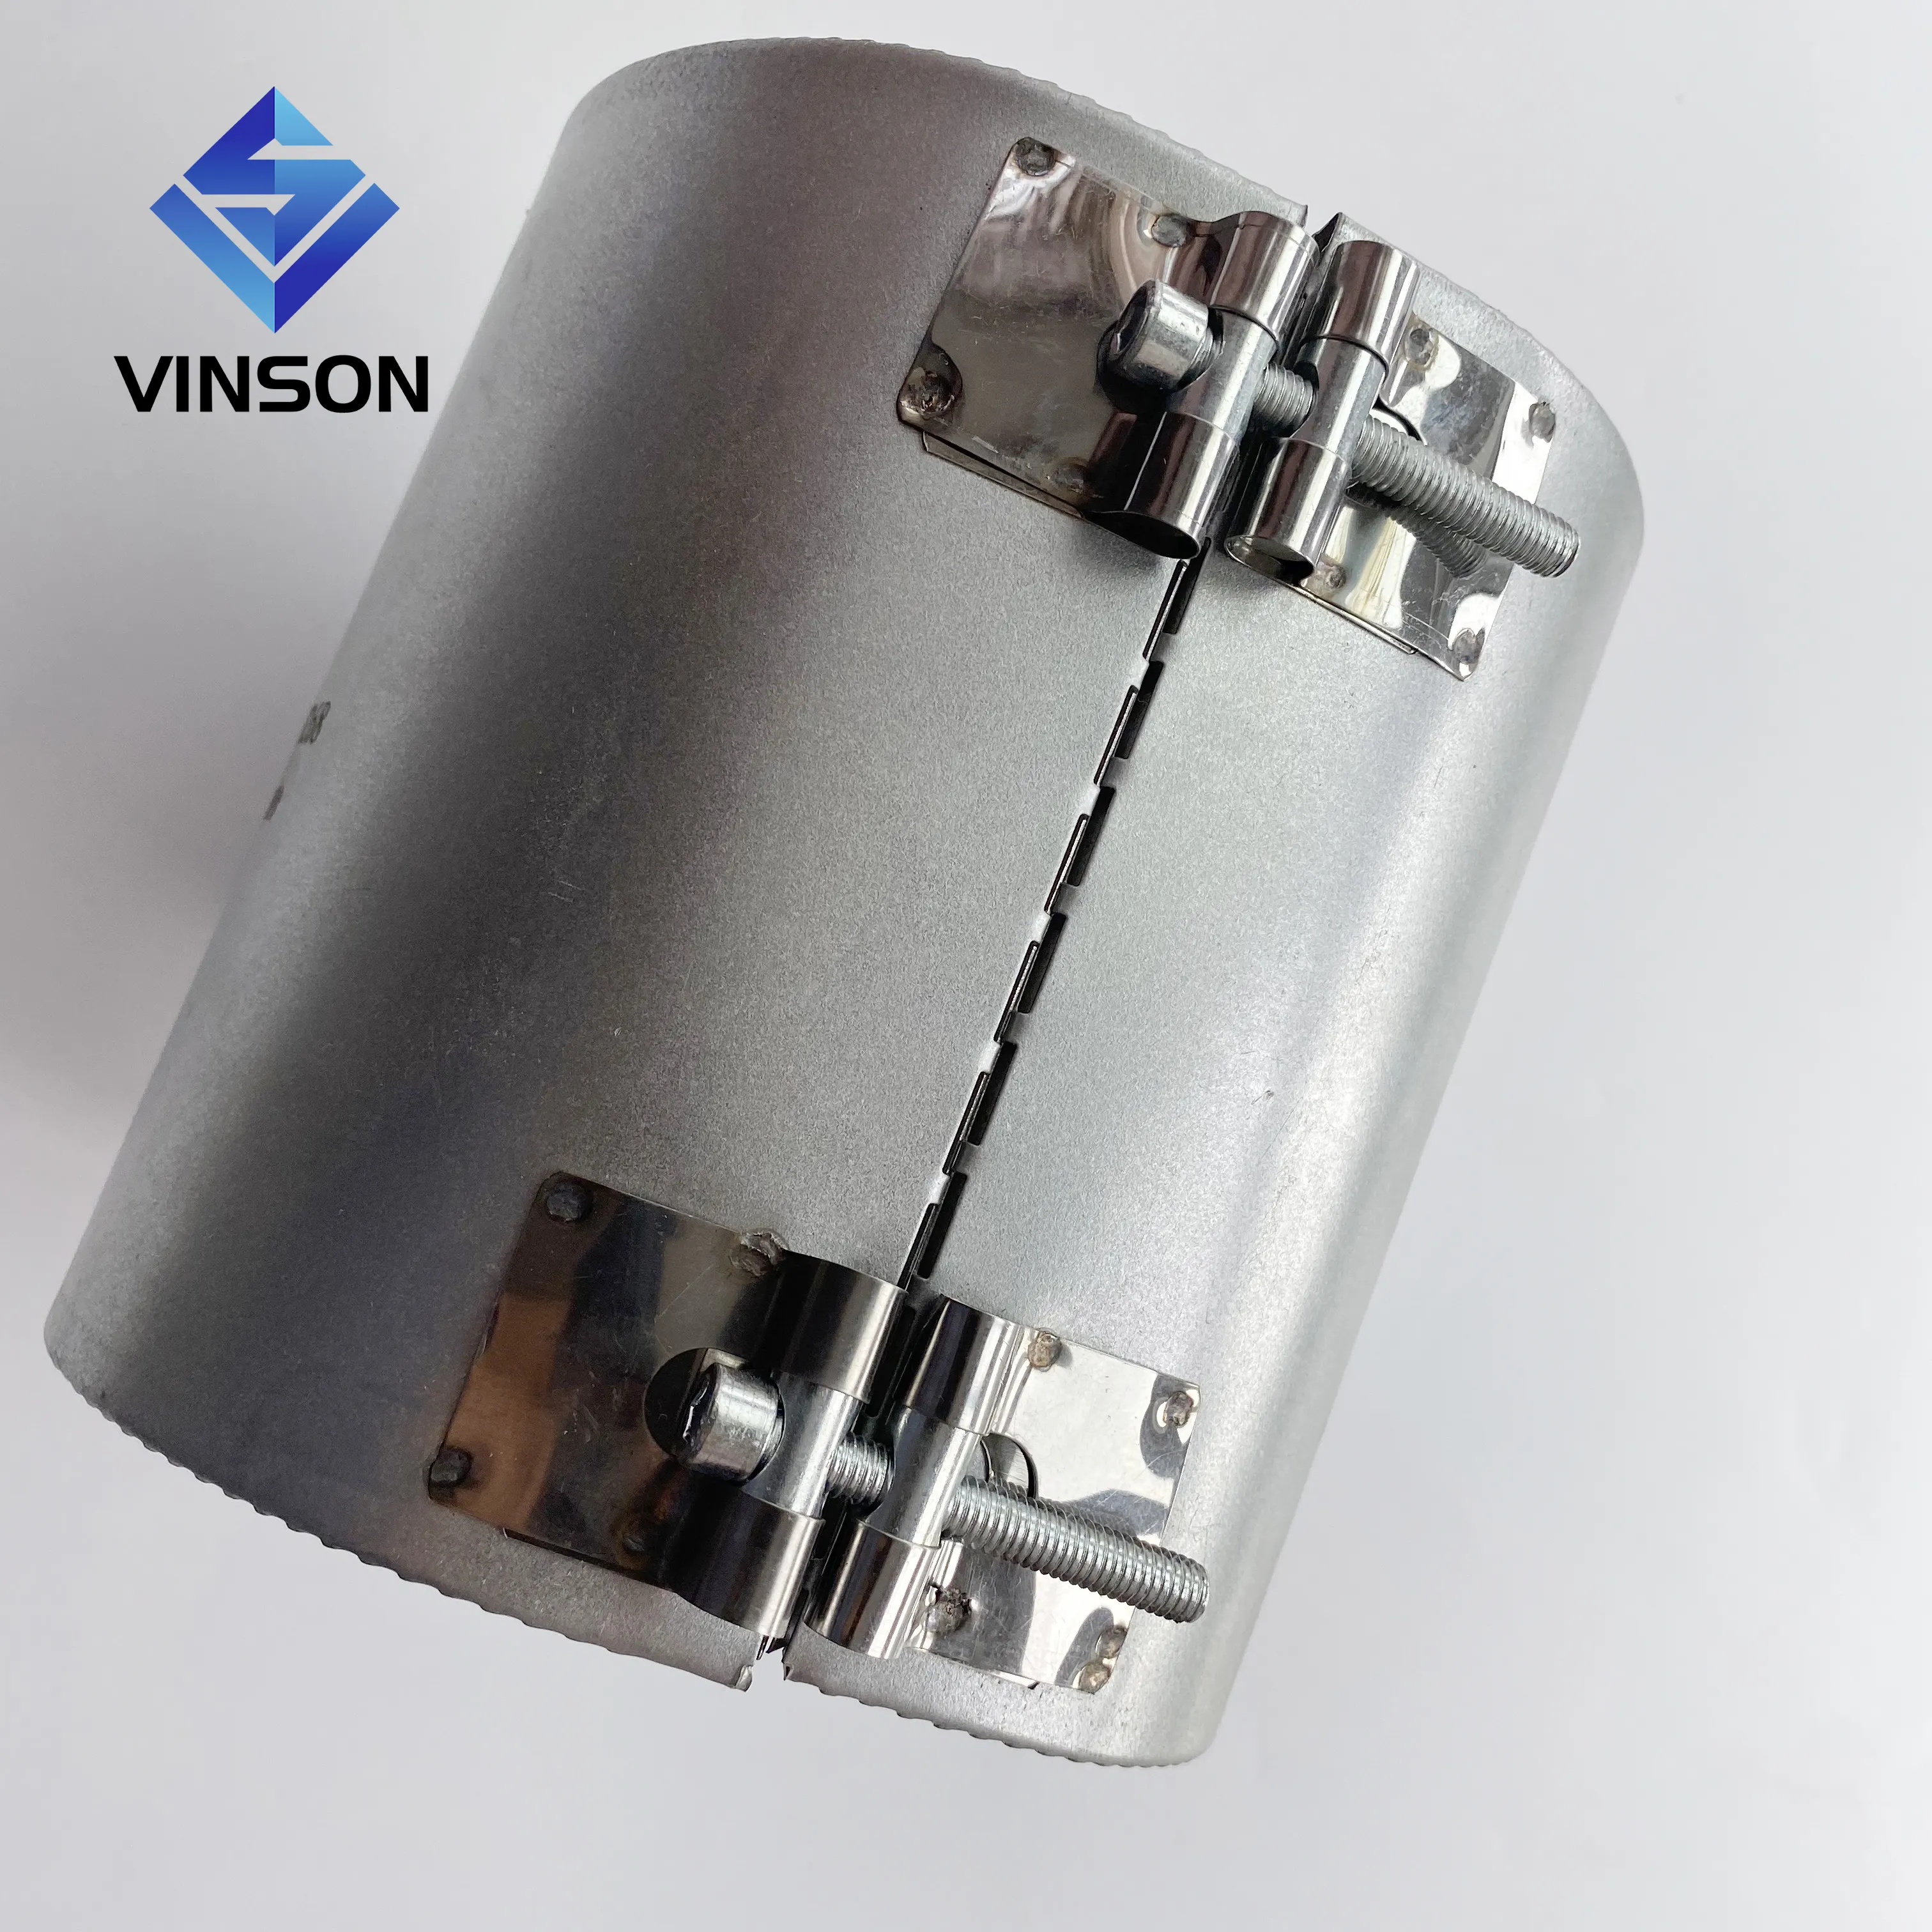 VINSON 240v 3500w screw barrel heating element ceramic heater band for injection extrusion machine